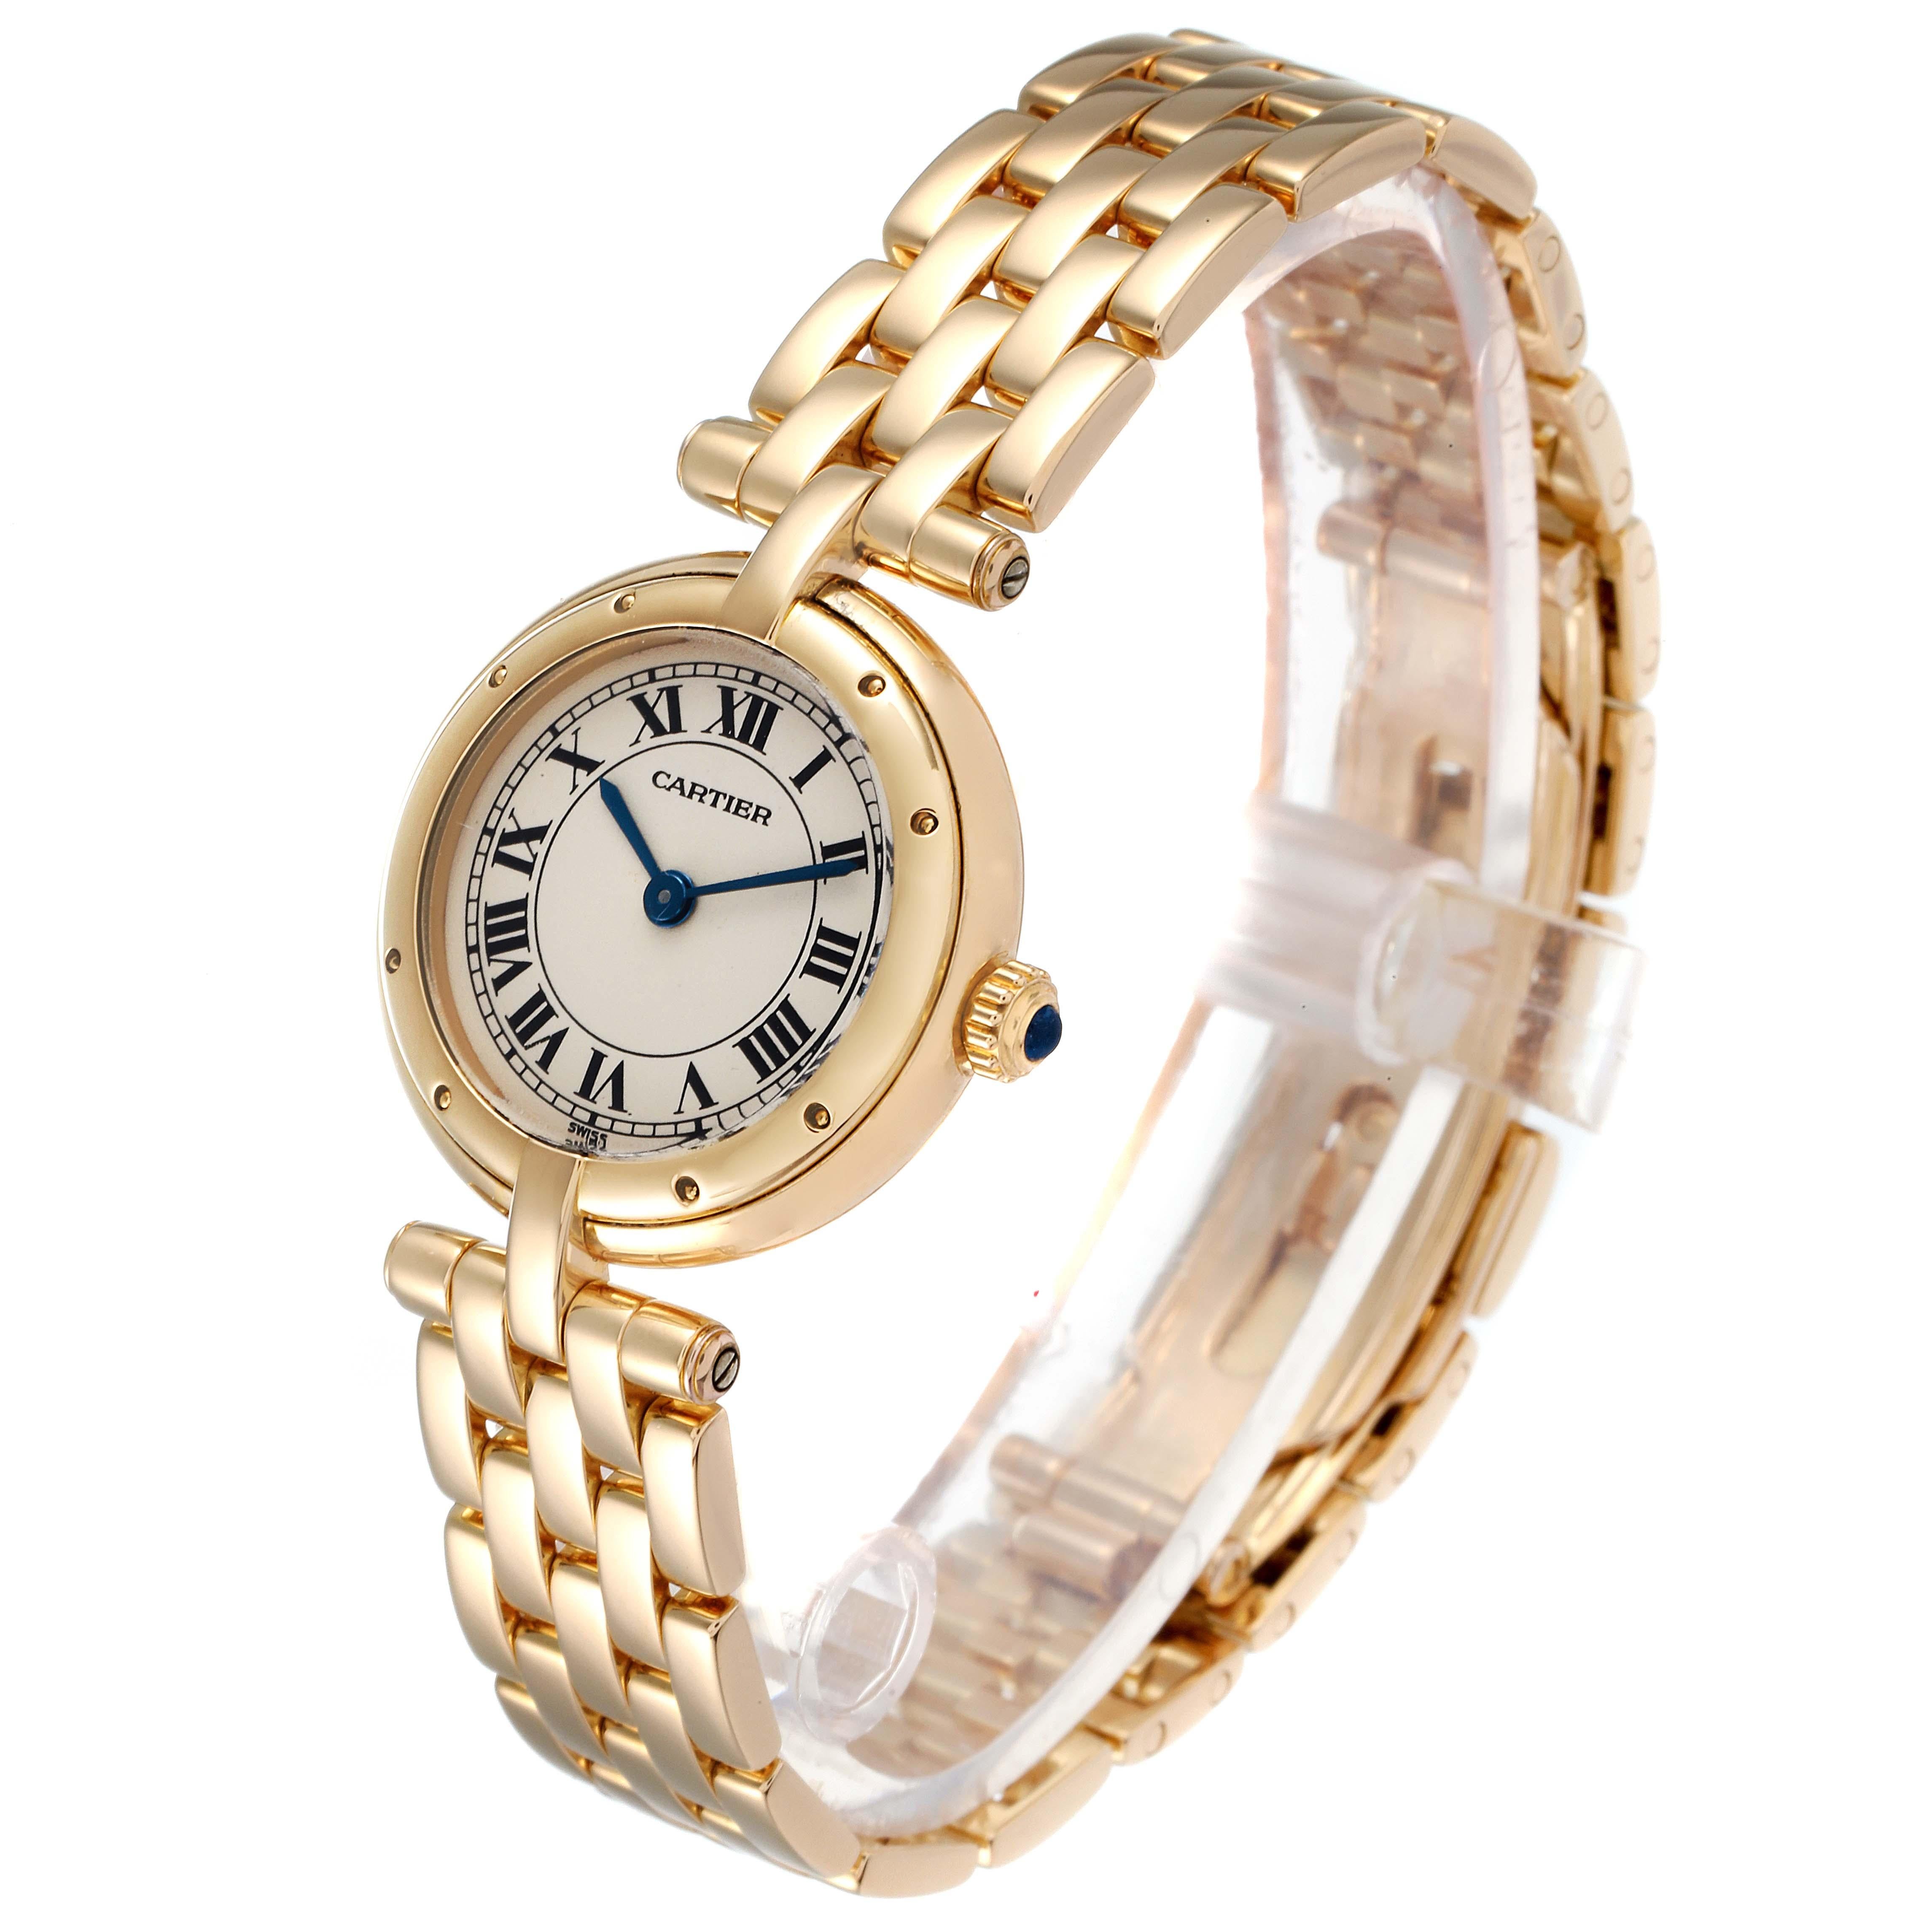 Cartier Panthere Vendome 18K Yellow Gold Ladies Watch 6692 In Excellent Condition For Sale In Atlanta, GA